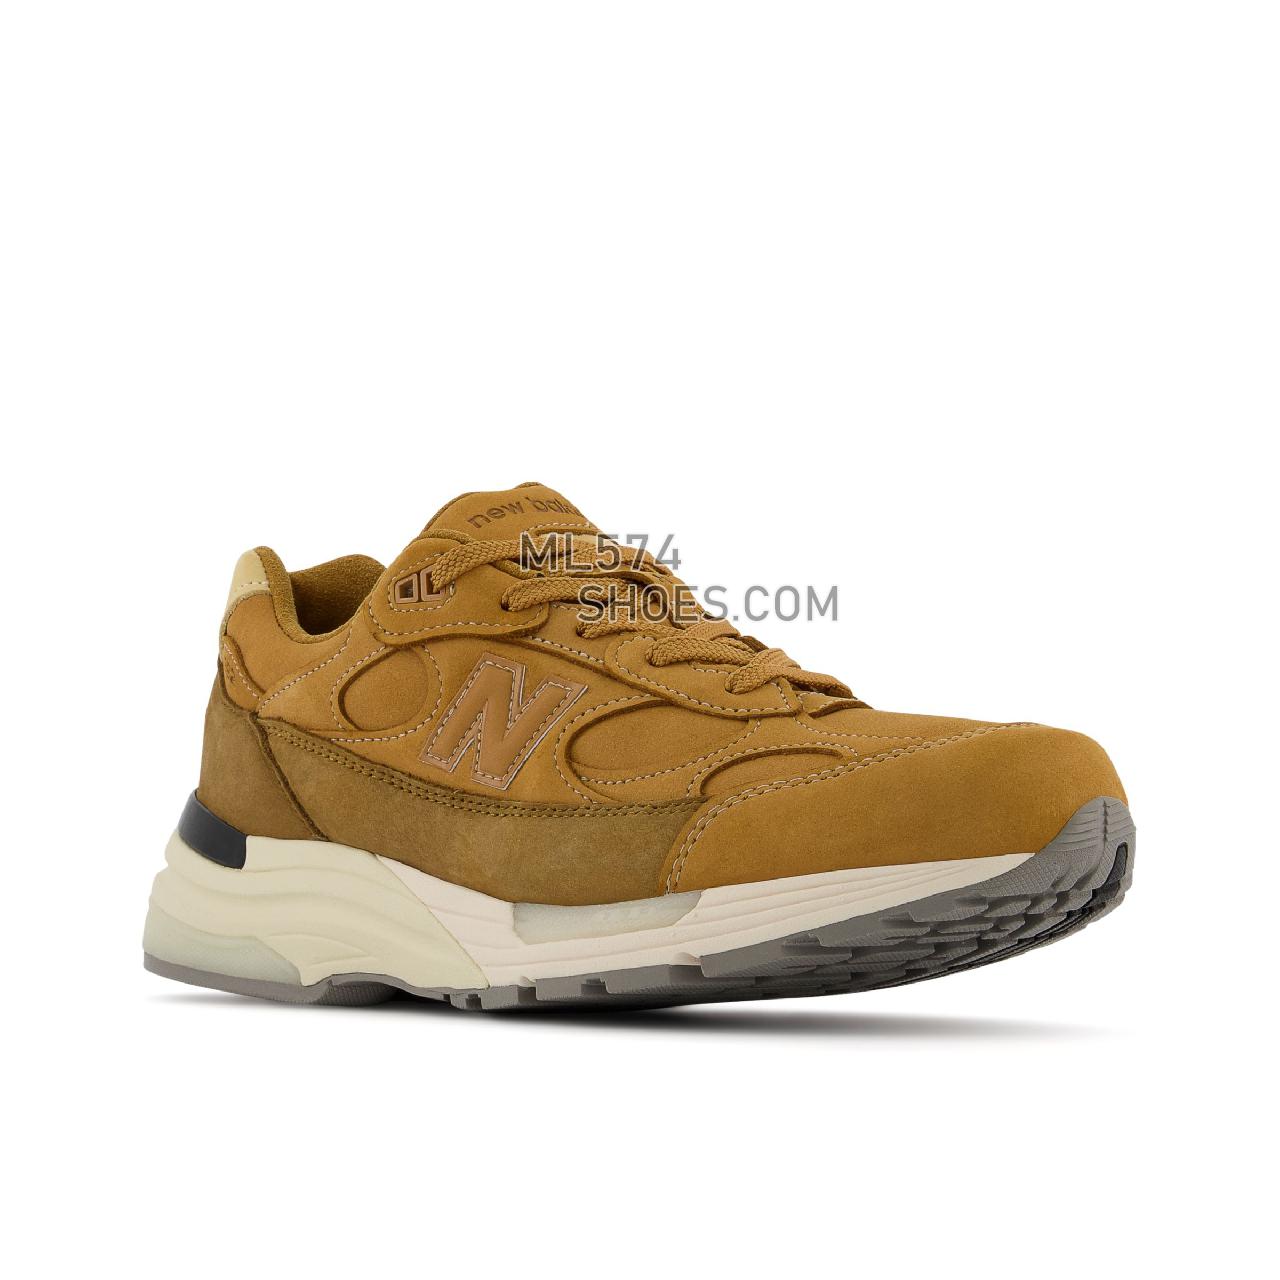 New Balance Made in USA 992 - Men's Made in USA And UK Sneakers - Tan with Brown - M992LX